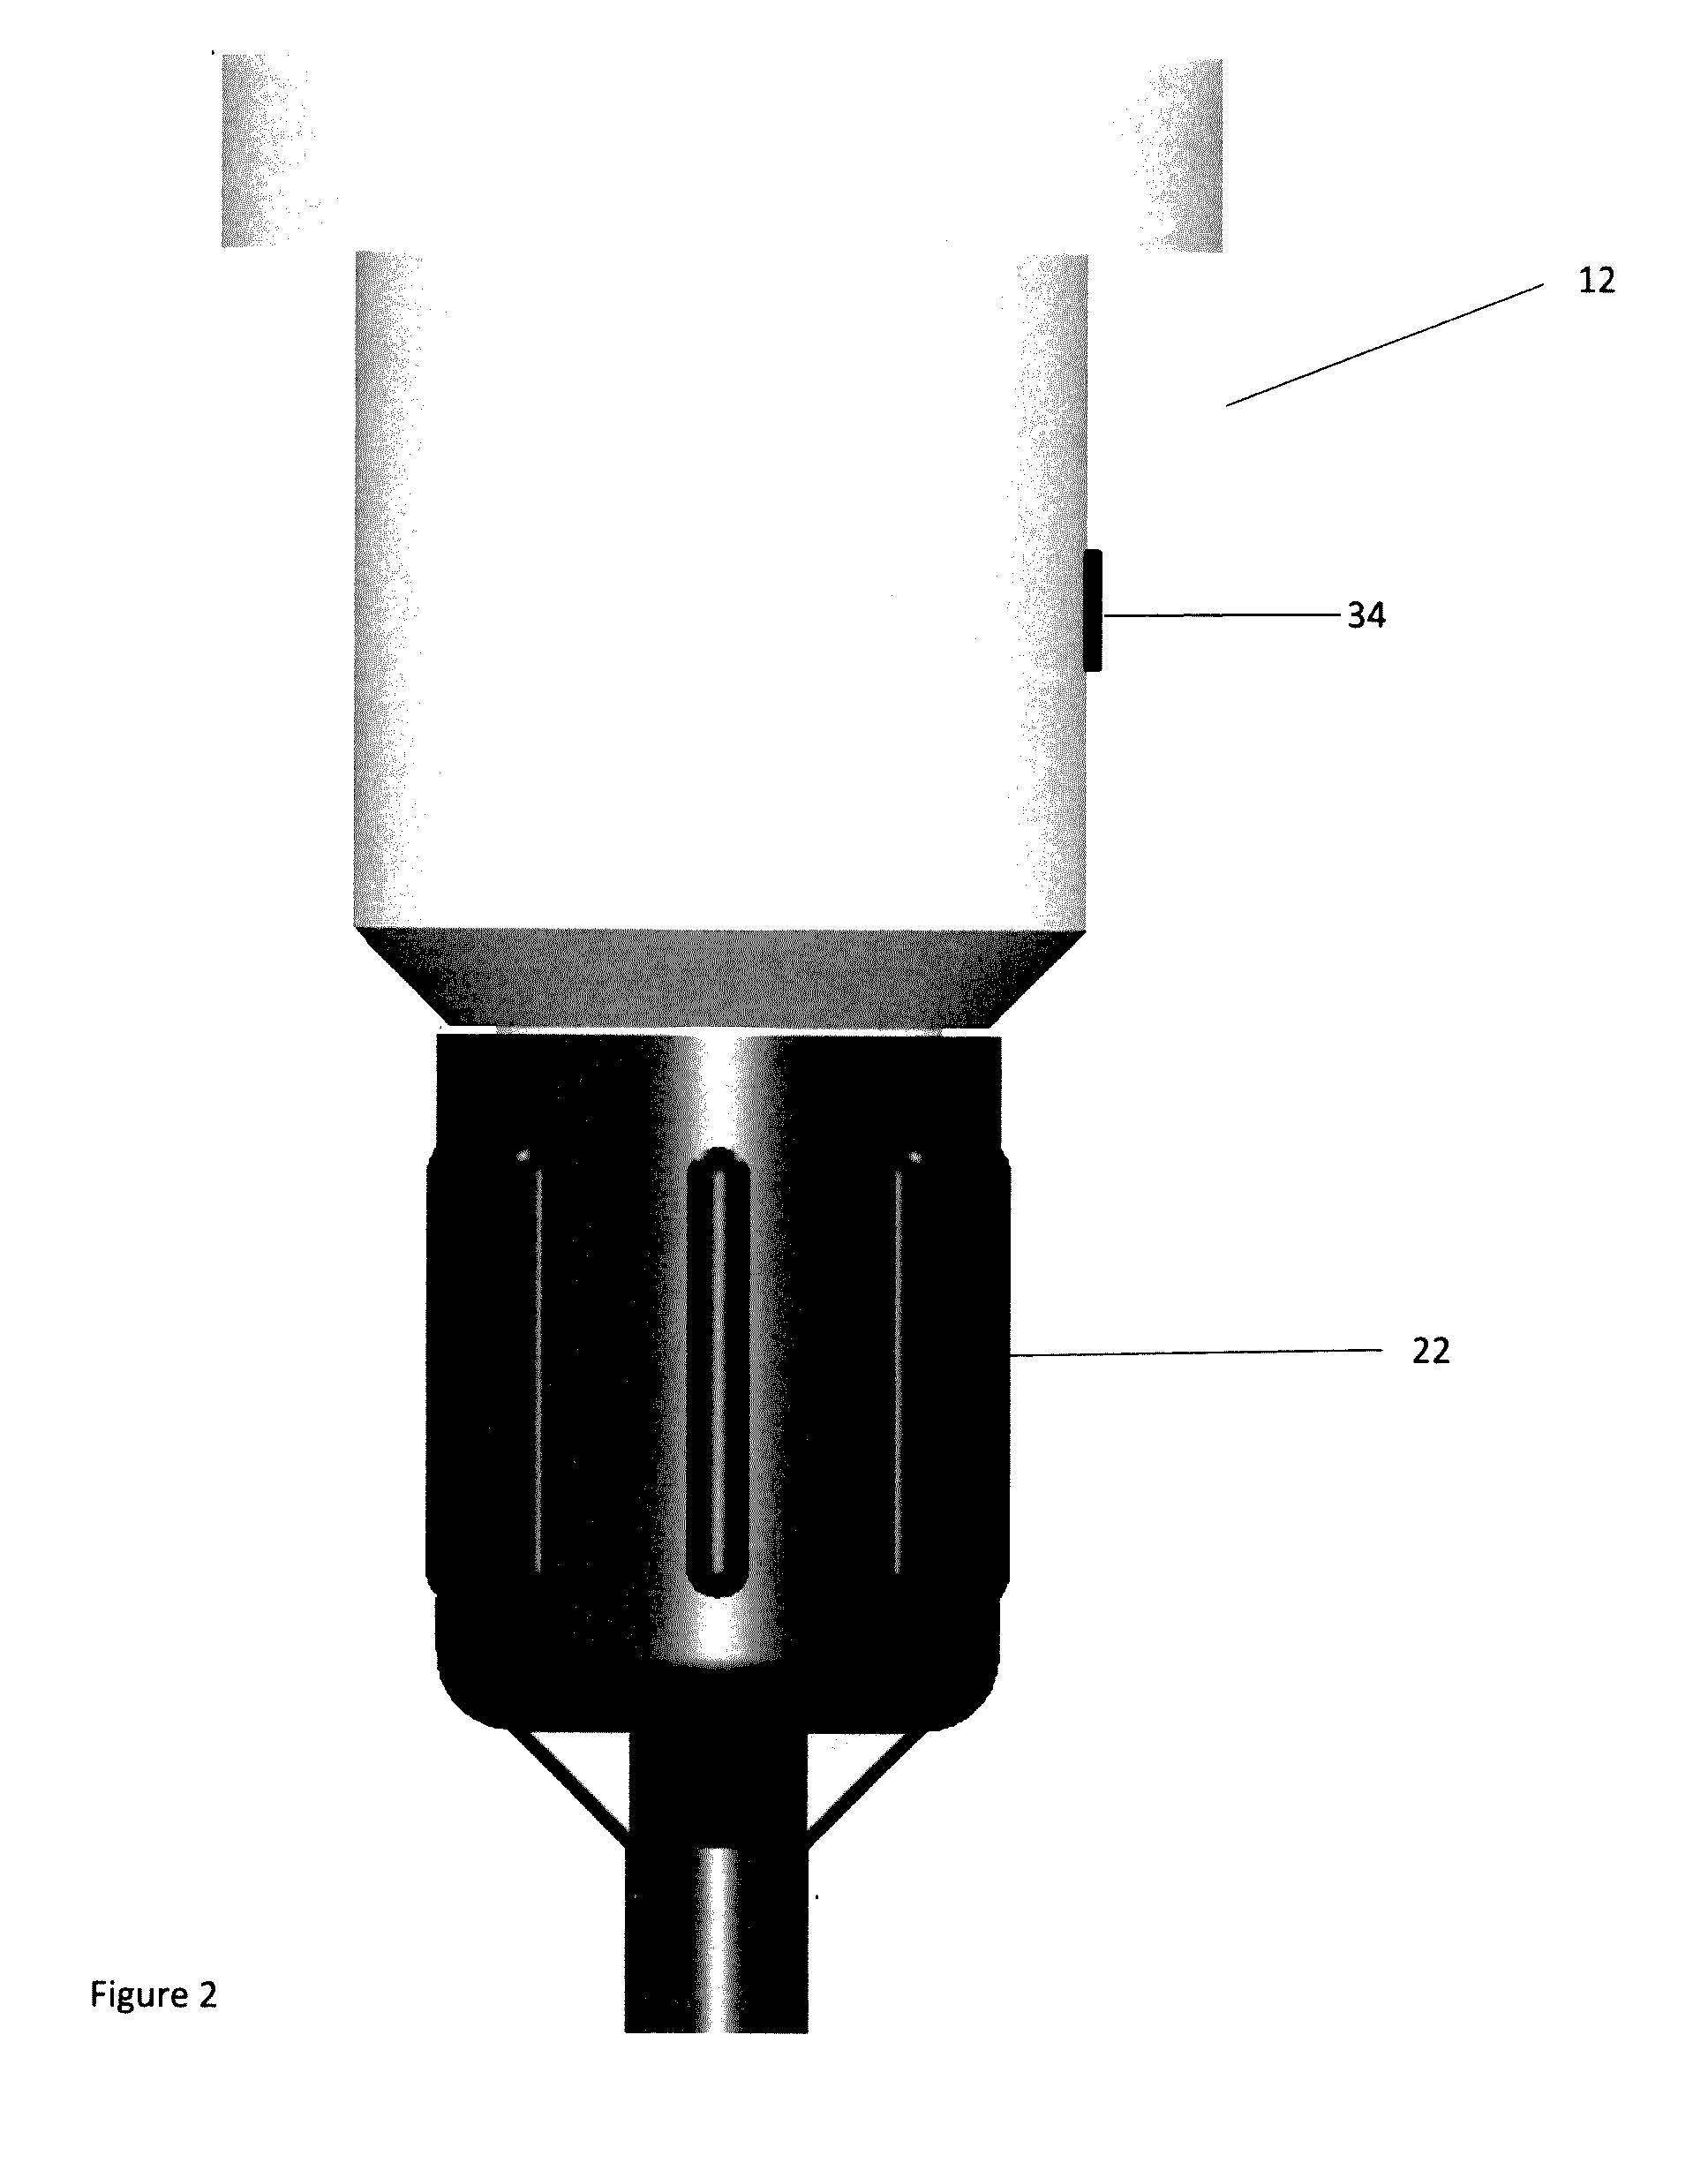 Filter for a propellant gas evacuation system